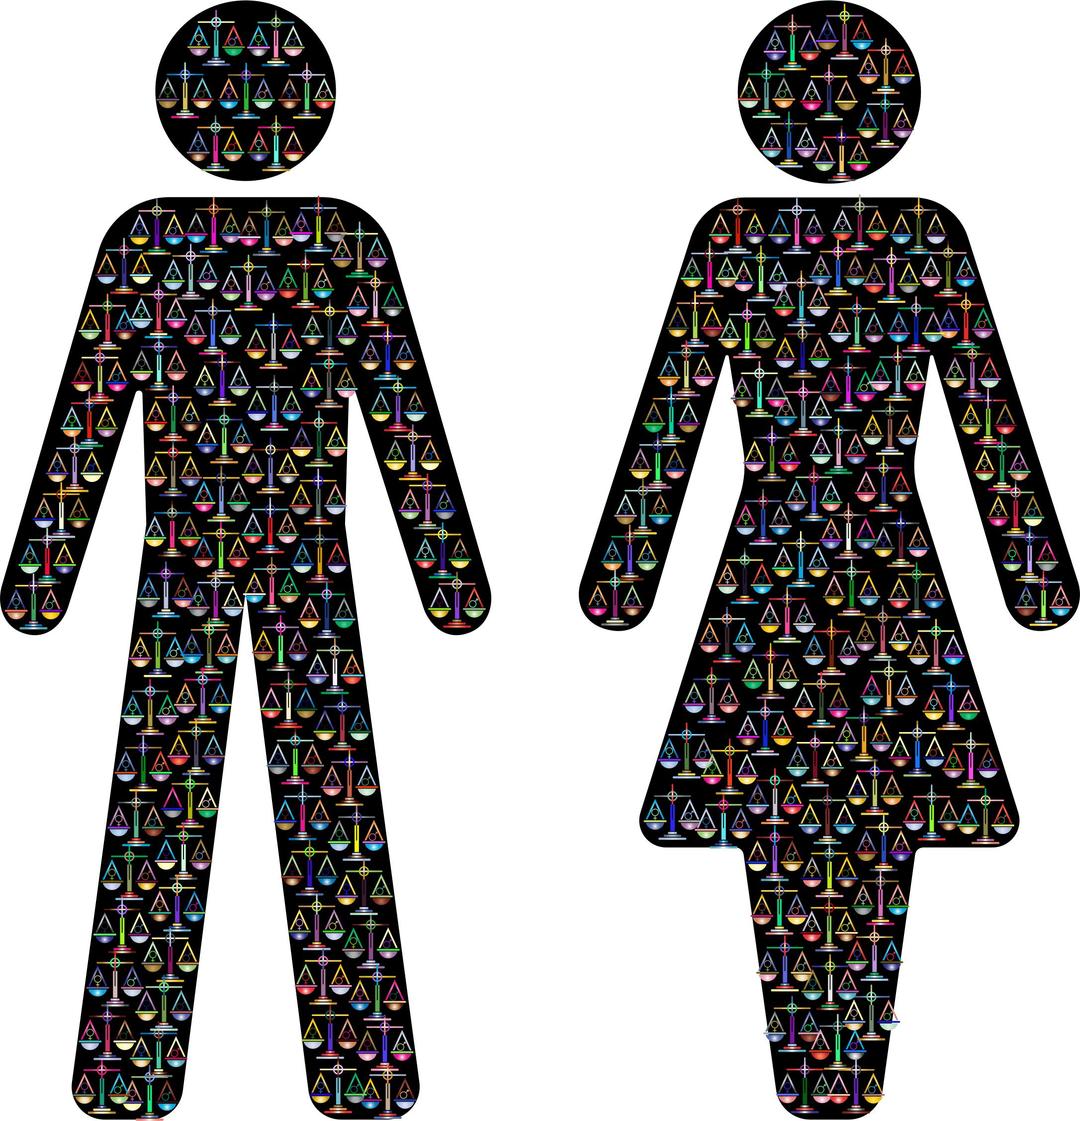 Prismatic Gender Equality Male And Female Figures 3 png transparent